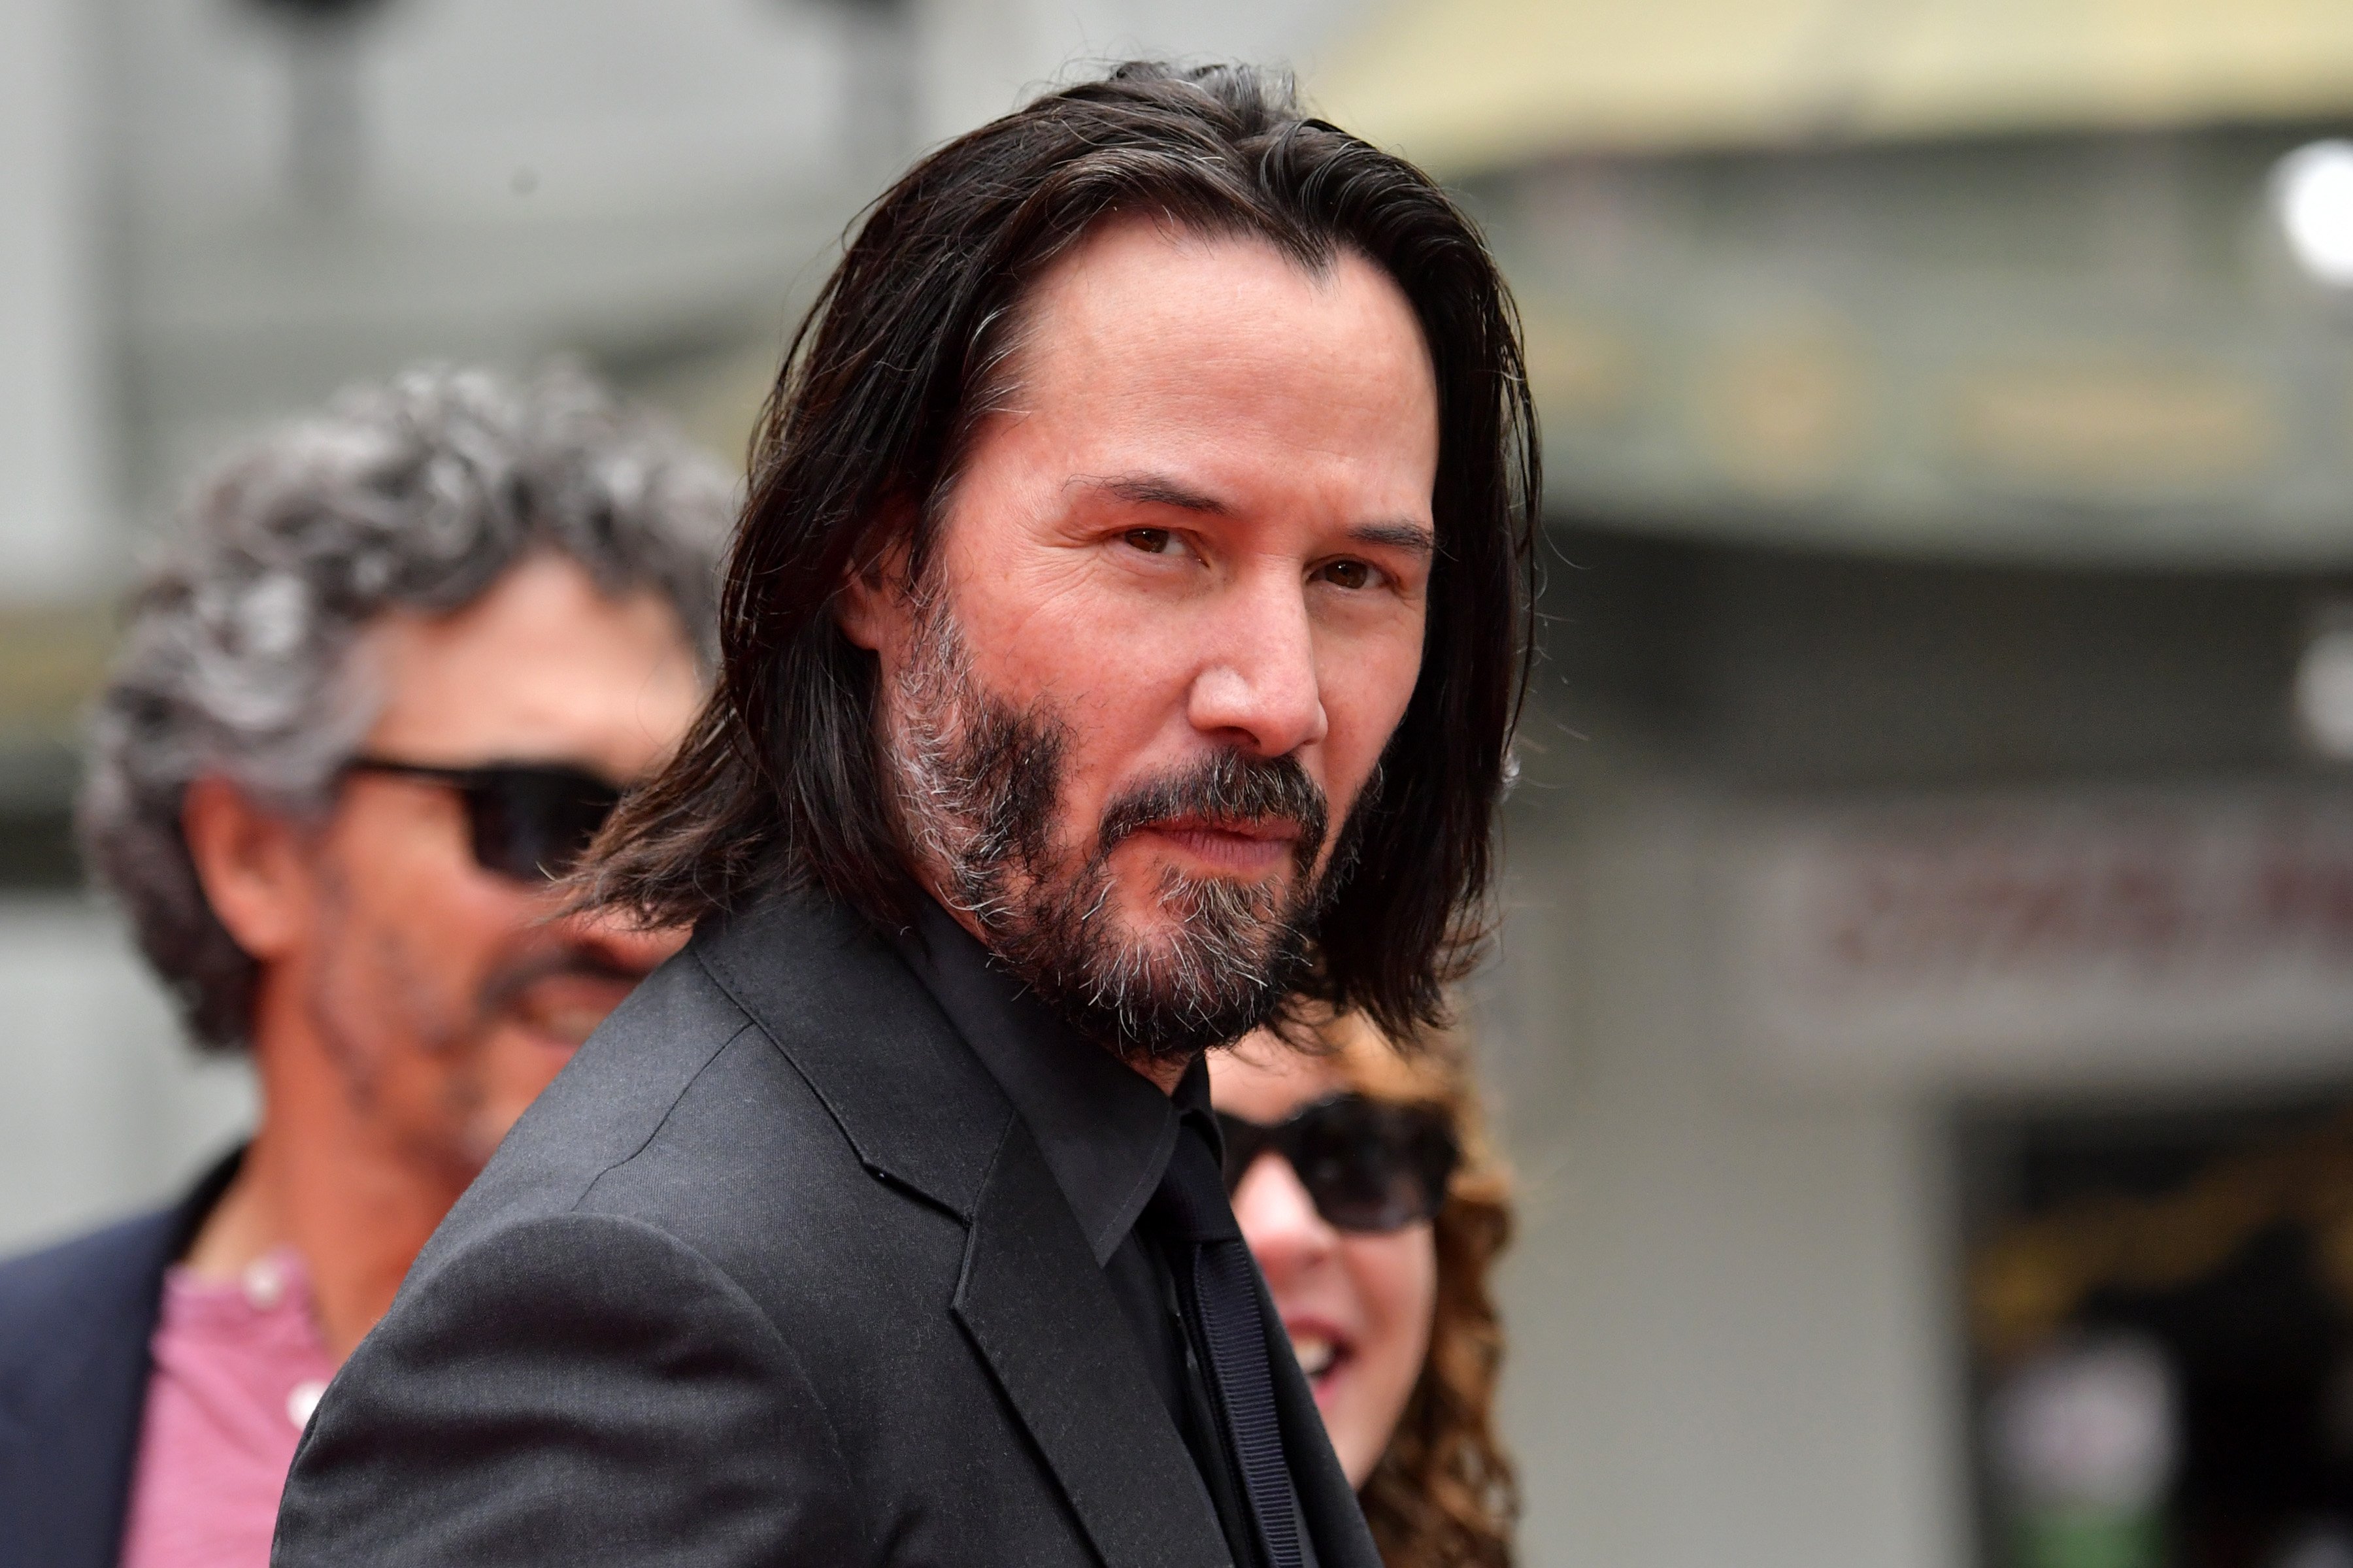 Keanu Reeves arrives for his handprint ceremony on May 14, 2019, in Hollywood, California. | Source: Getty Images.